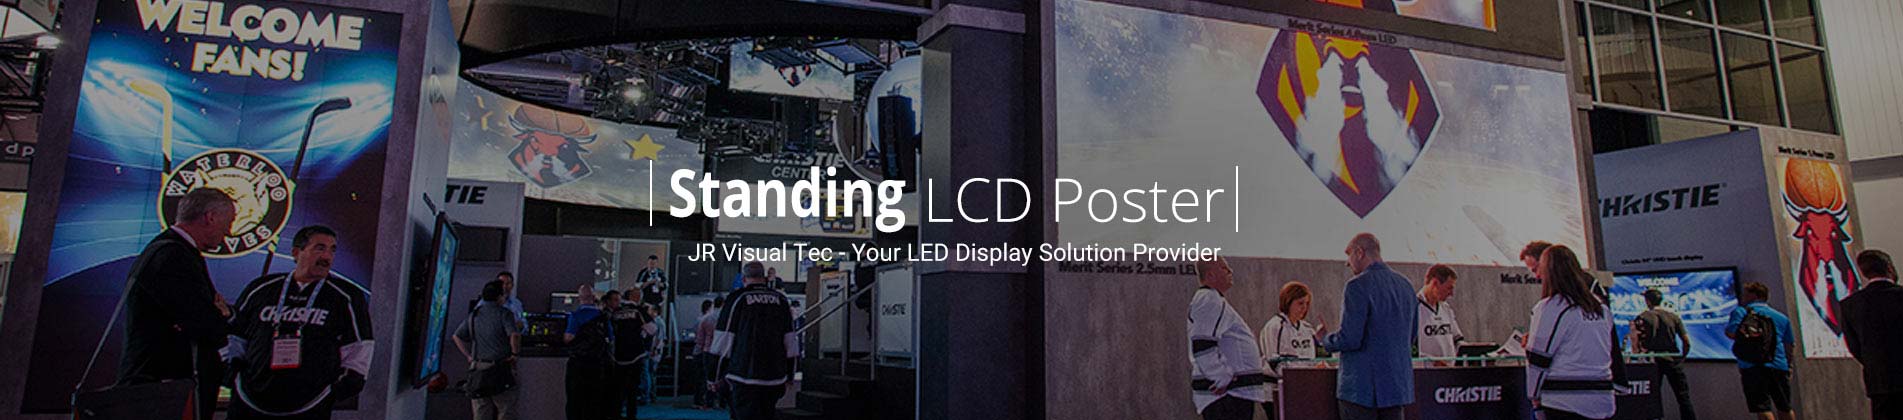 standing lcd poster